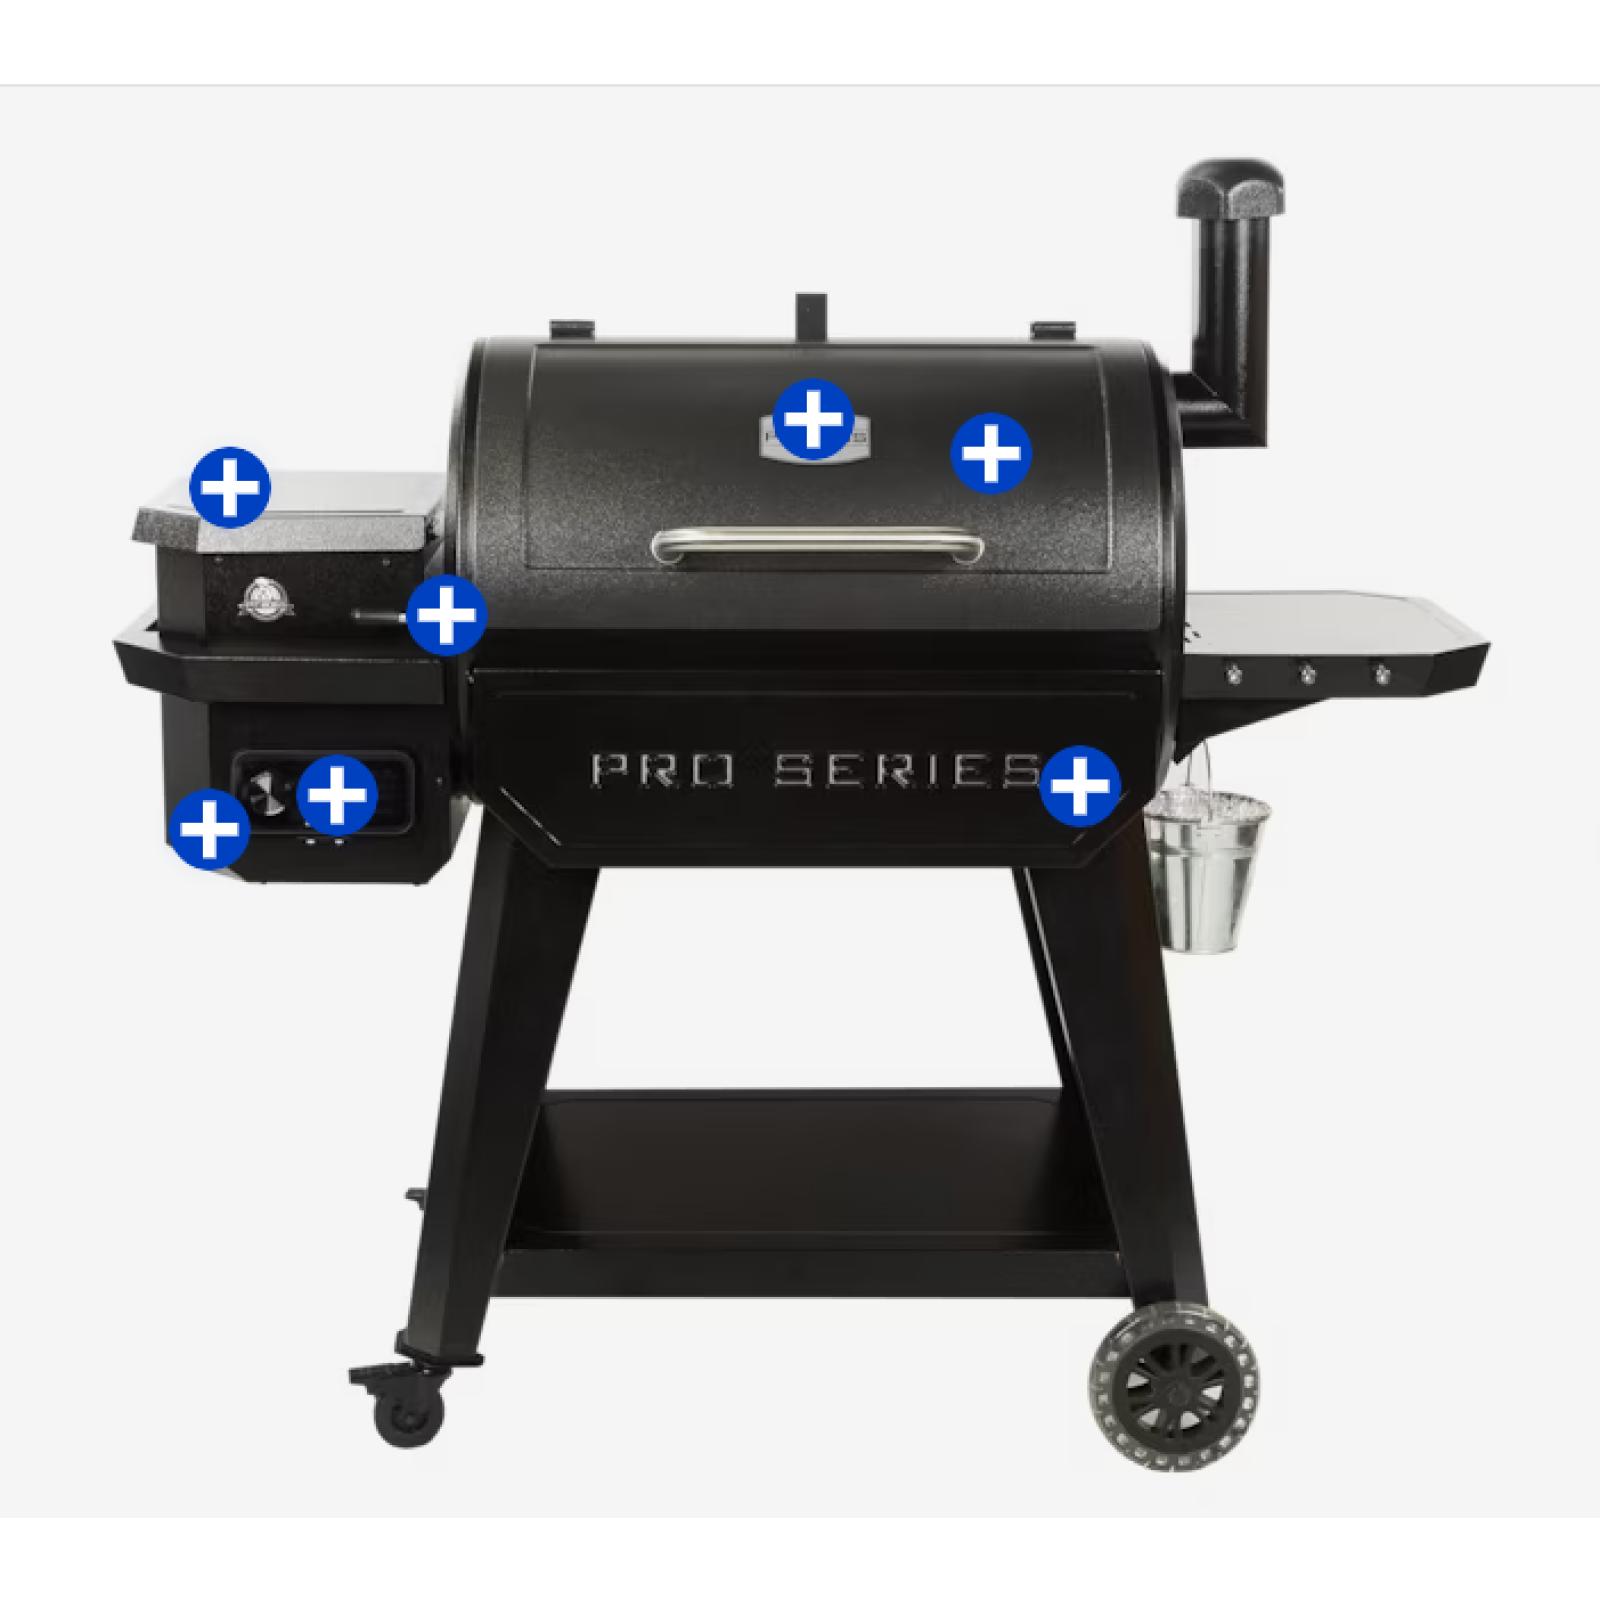 DALLAS LOCATION - Pit Boss Pro Series 850-Sq in Hammertone Pellet Grill with smart compatibility PALLET - (4 UNITS)